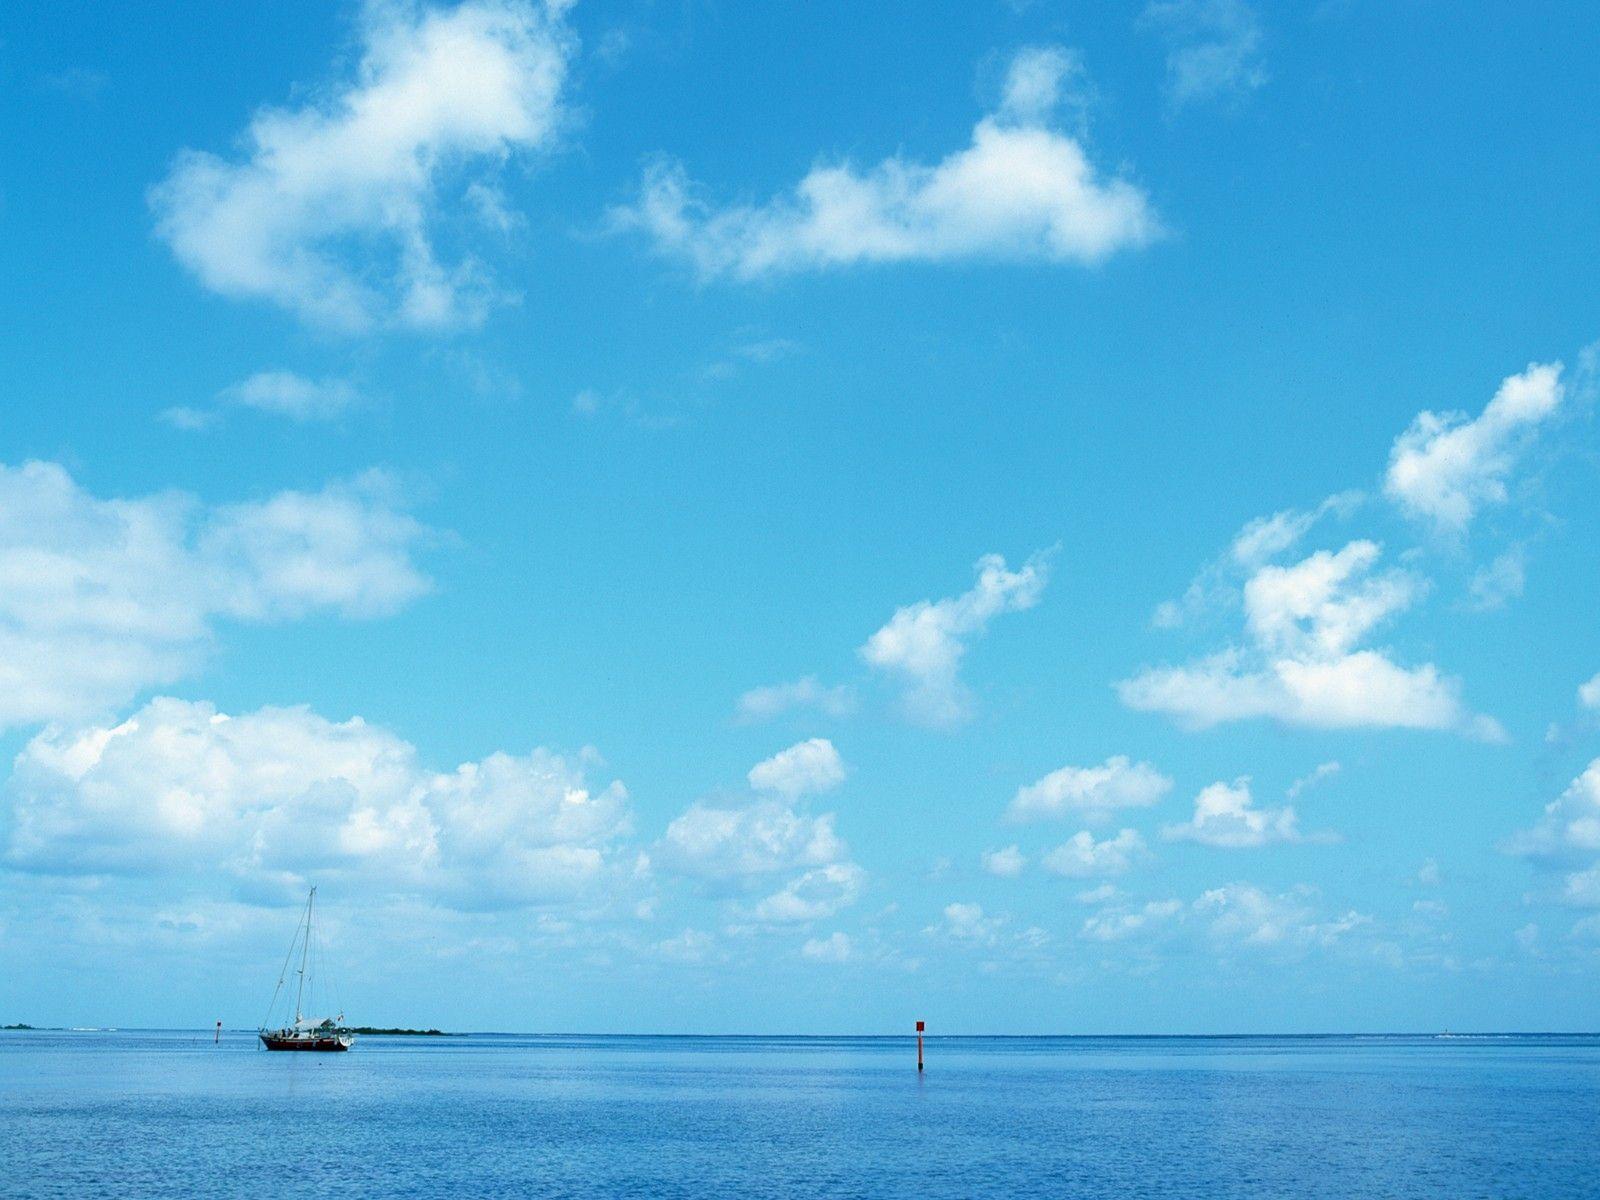 Hd 1600x1200 Sea And Clouds Desktop Wallpaper Background